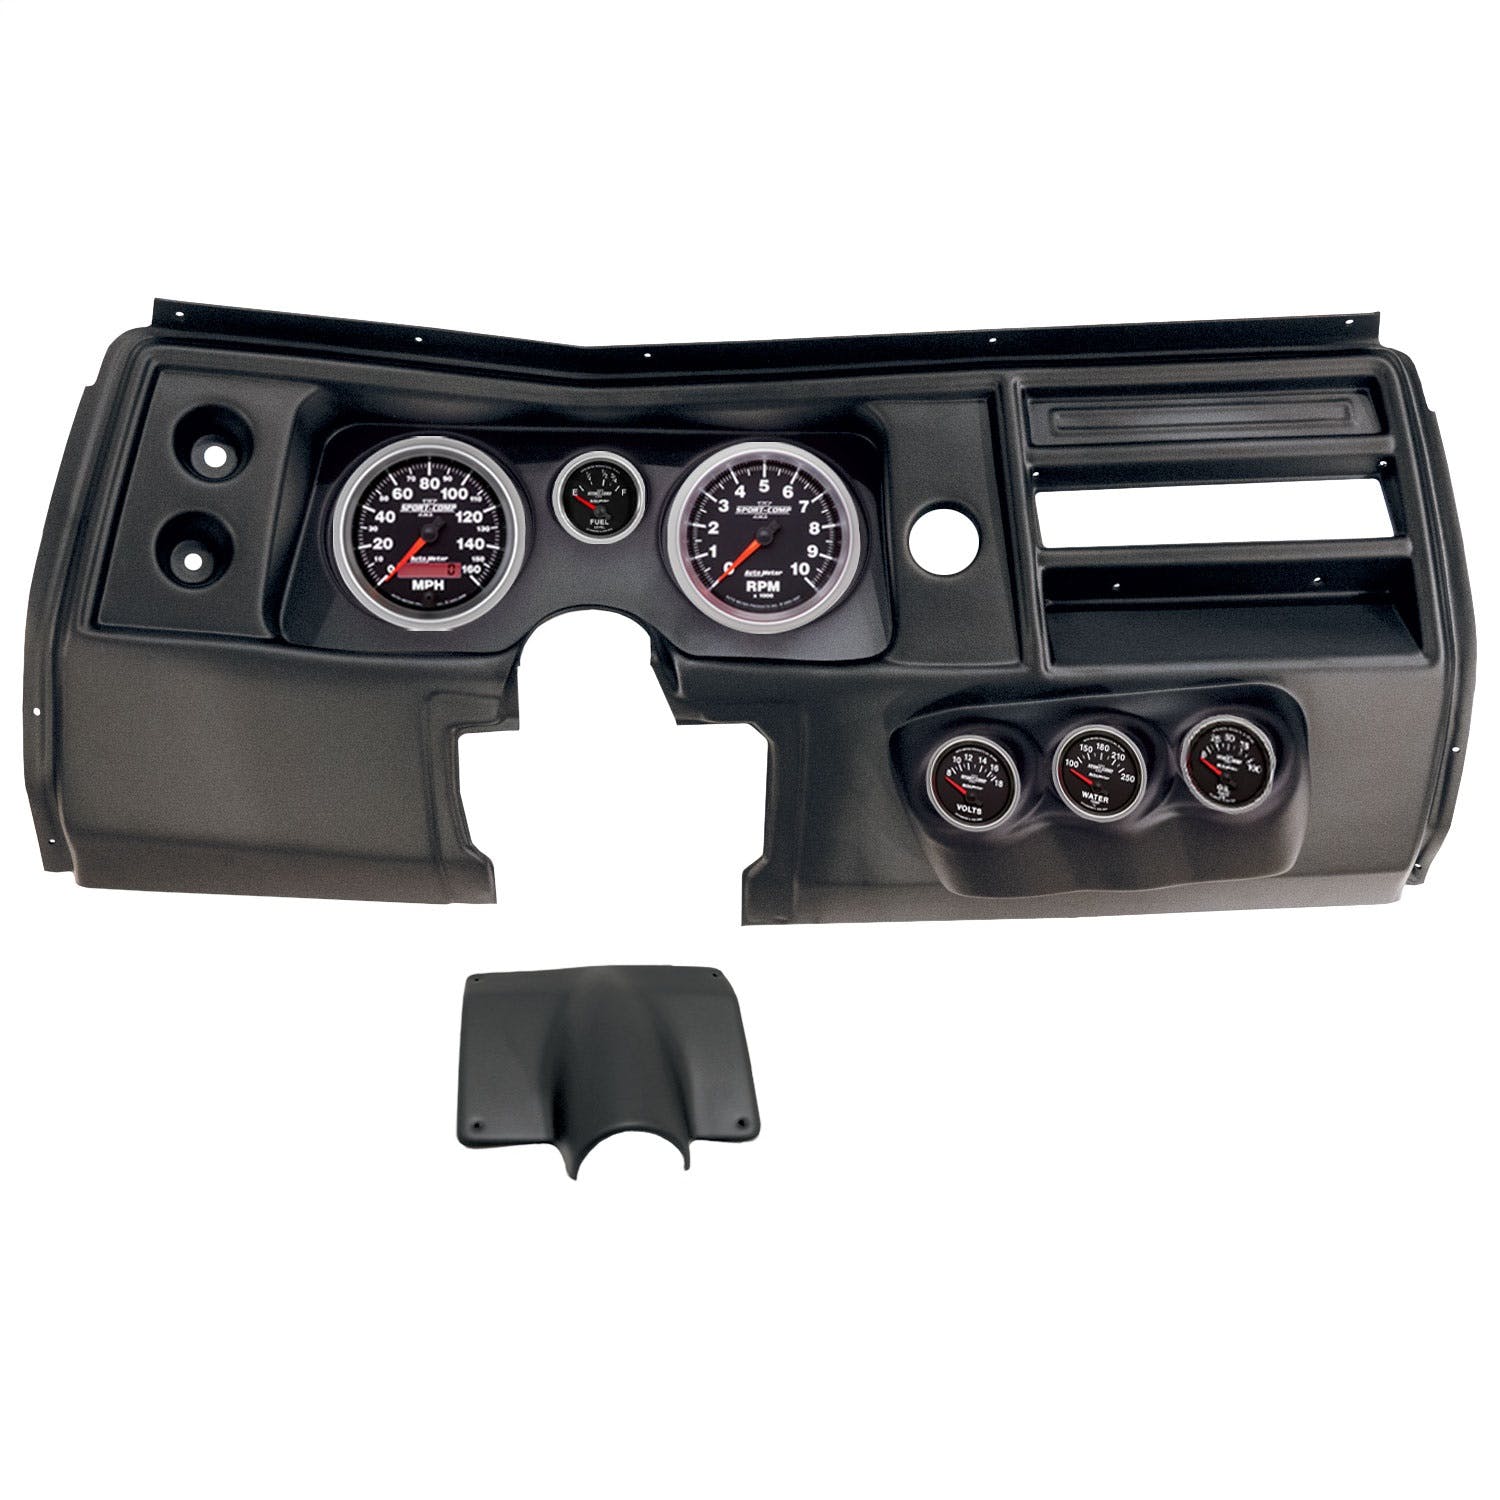 AutoMeter Products 2903-12 6 Gauge Direct-Fit Dash Kit, Chevy Chevelle No Vent 68, Sport-Comp II